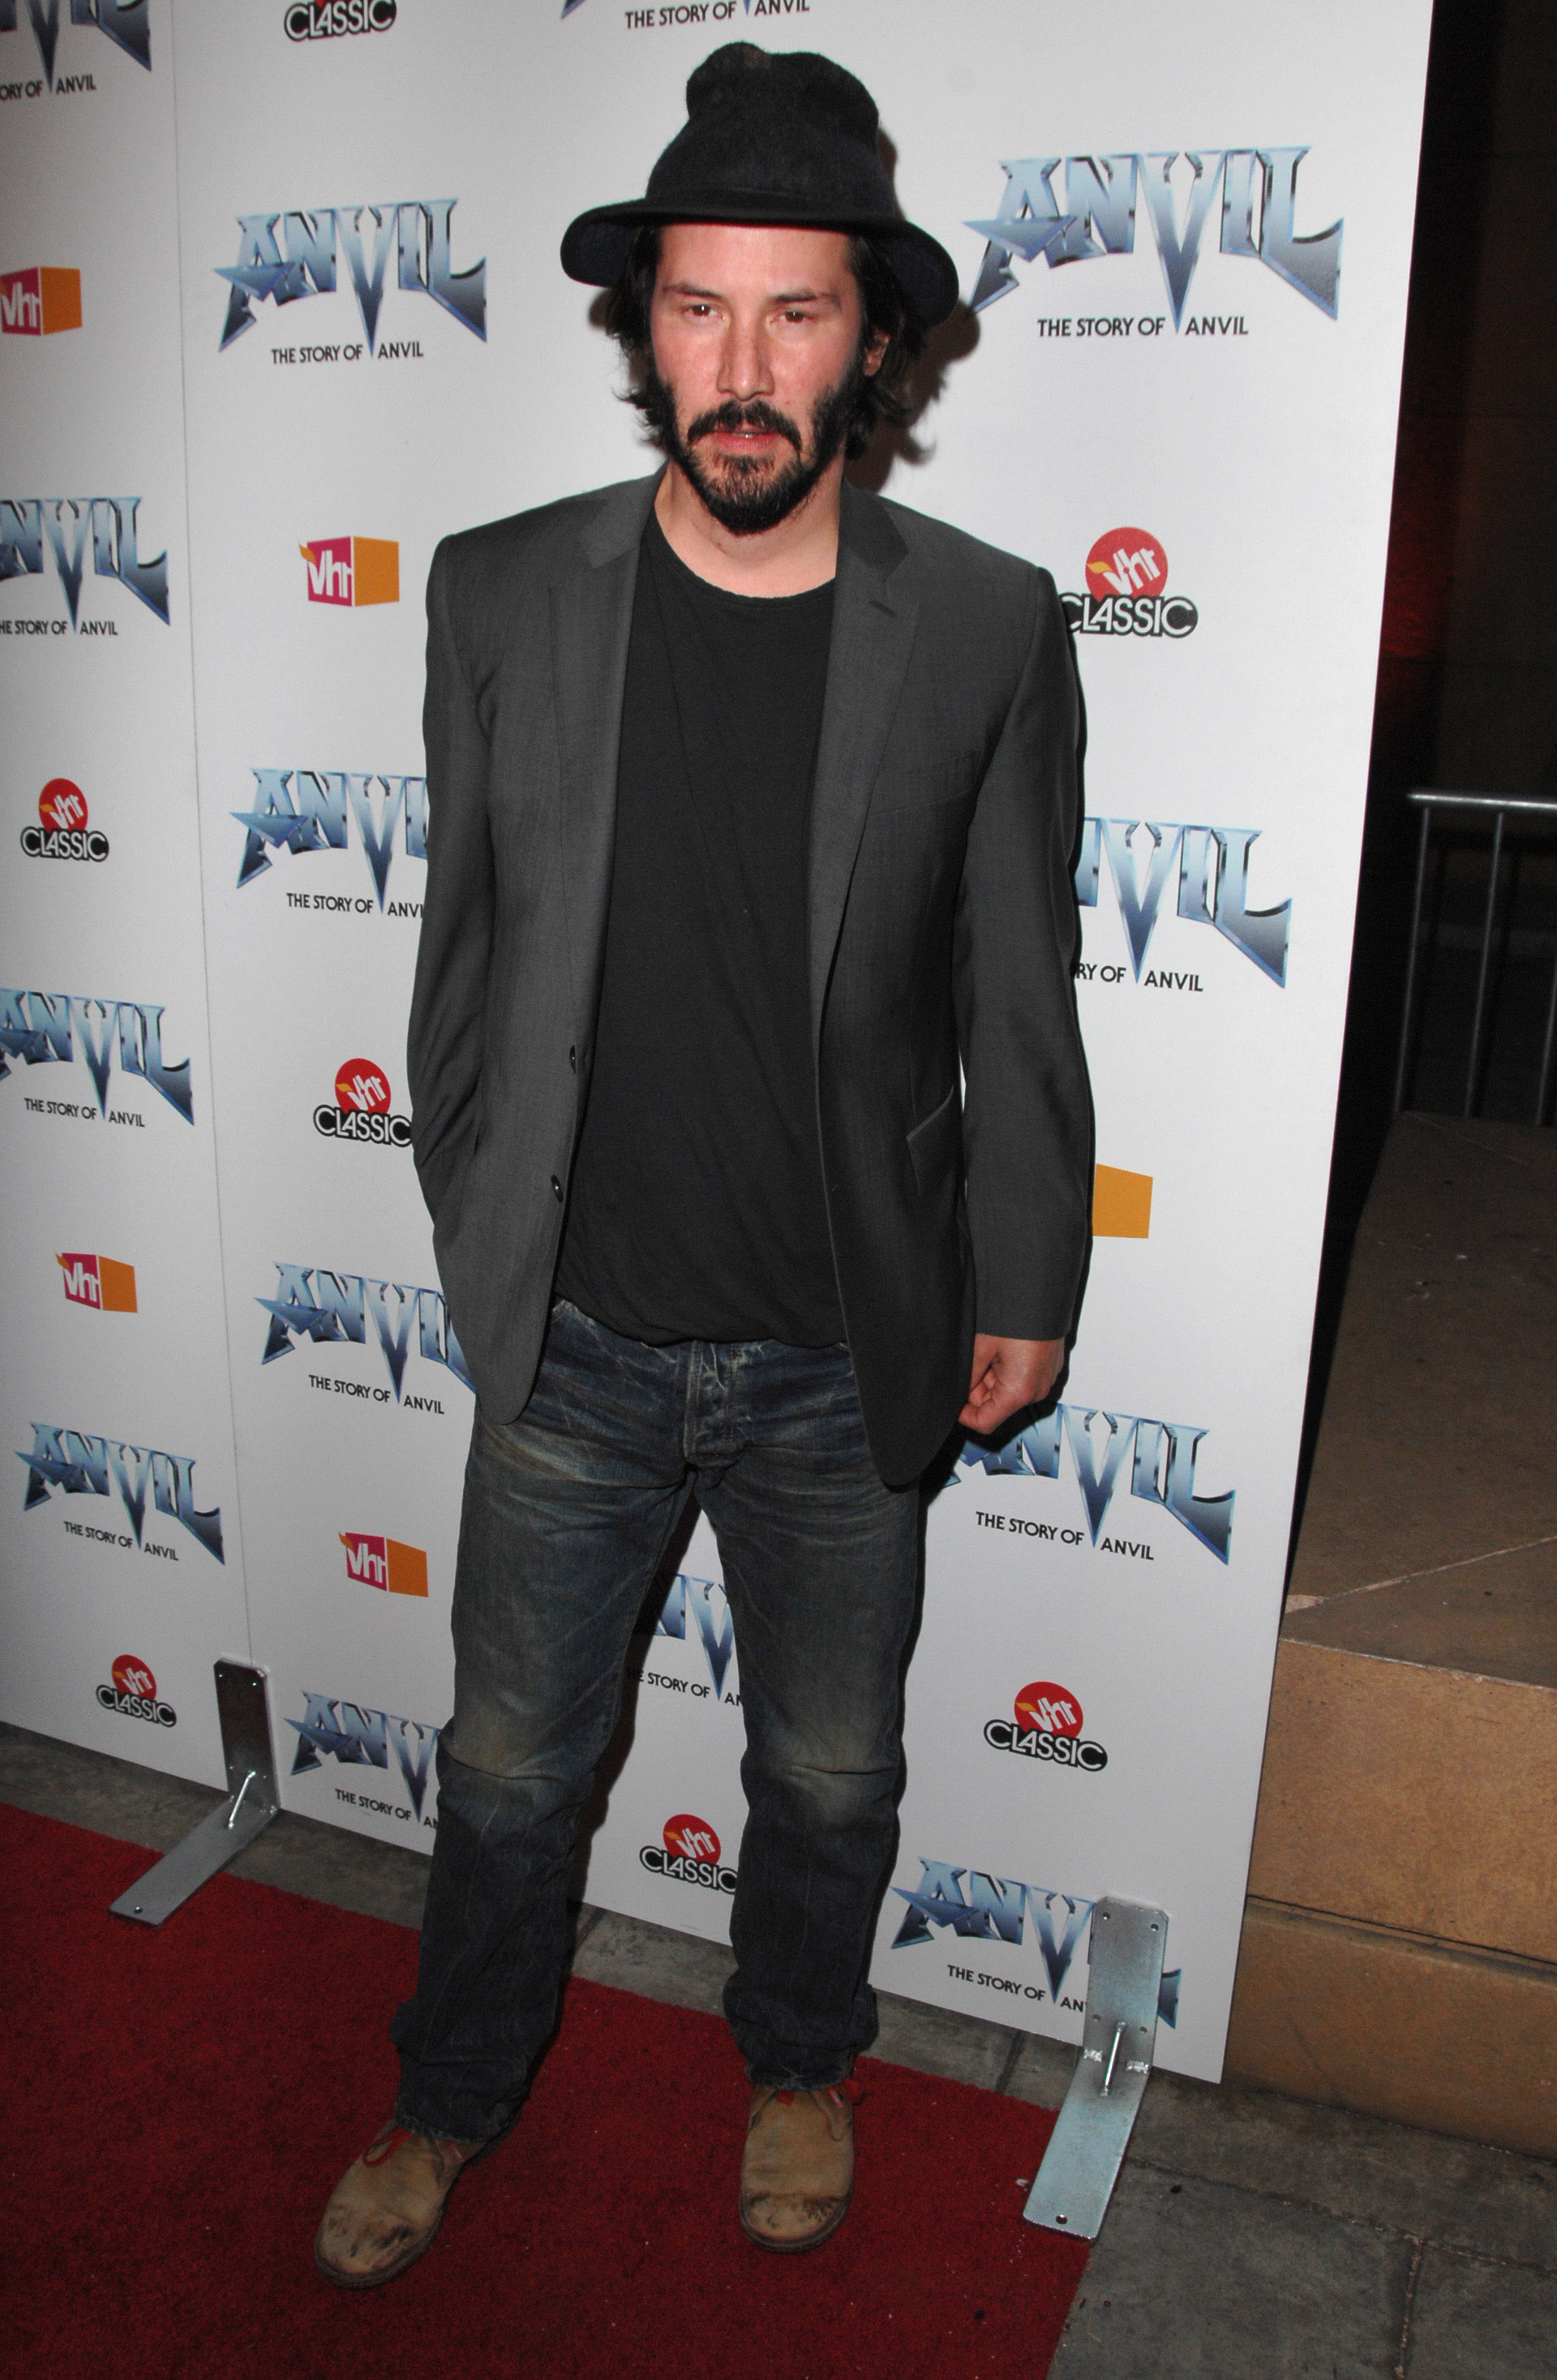 Keanu Reeves at the premiere of "Anvil! The Story Of Anvil" in Los Angeles, California, on April 7, 2009. | Source: Getty Images